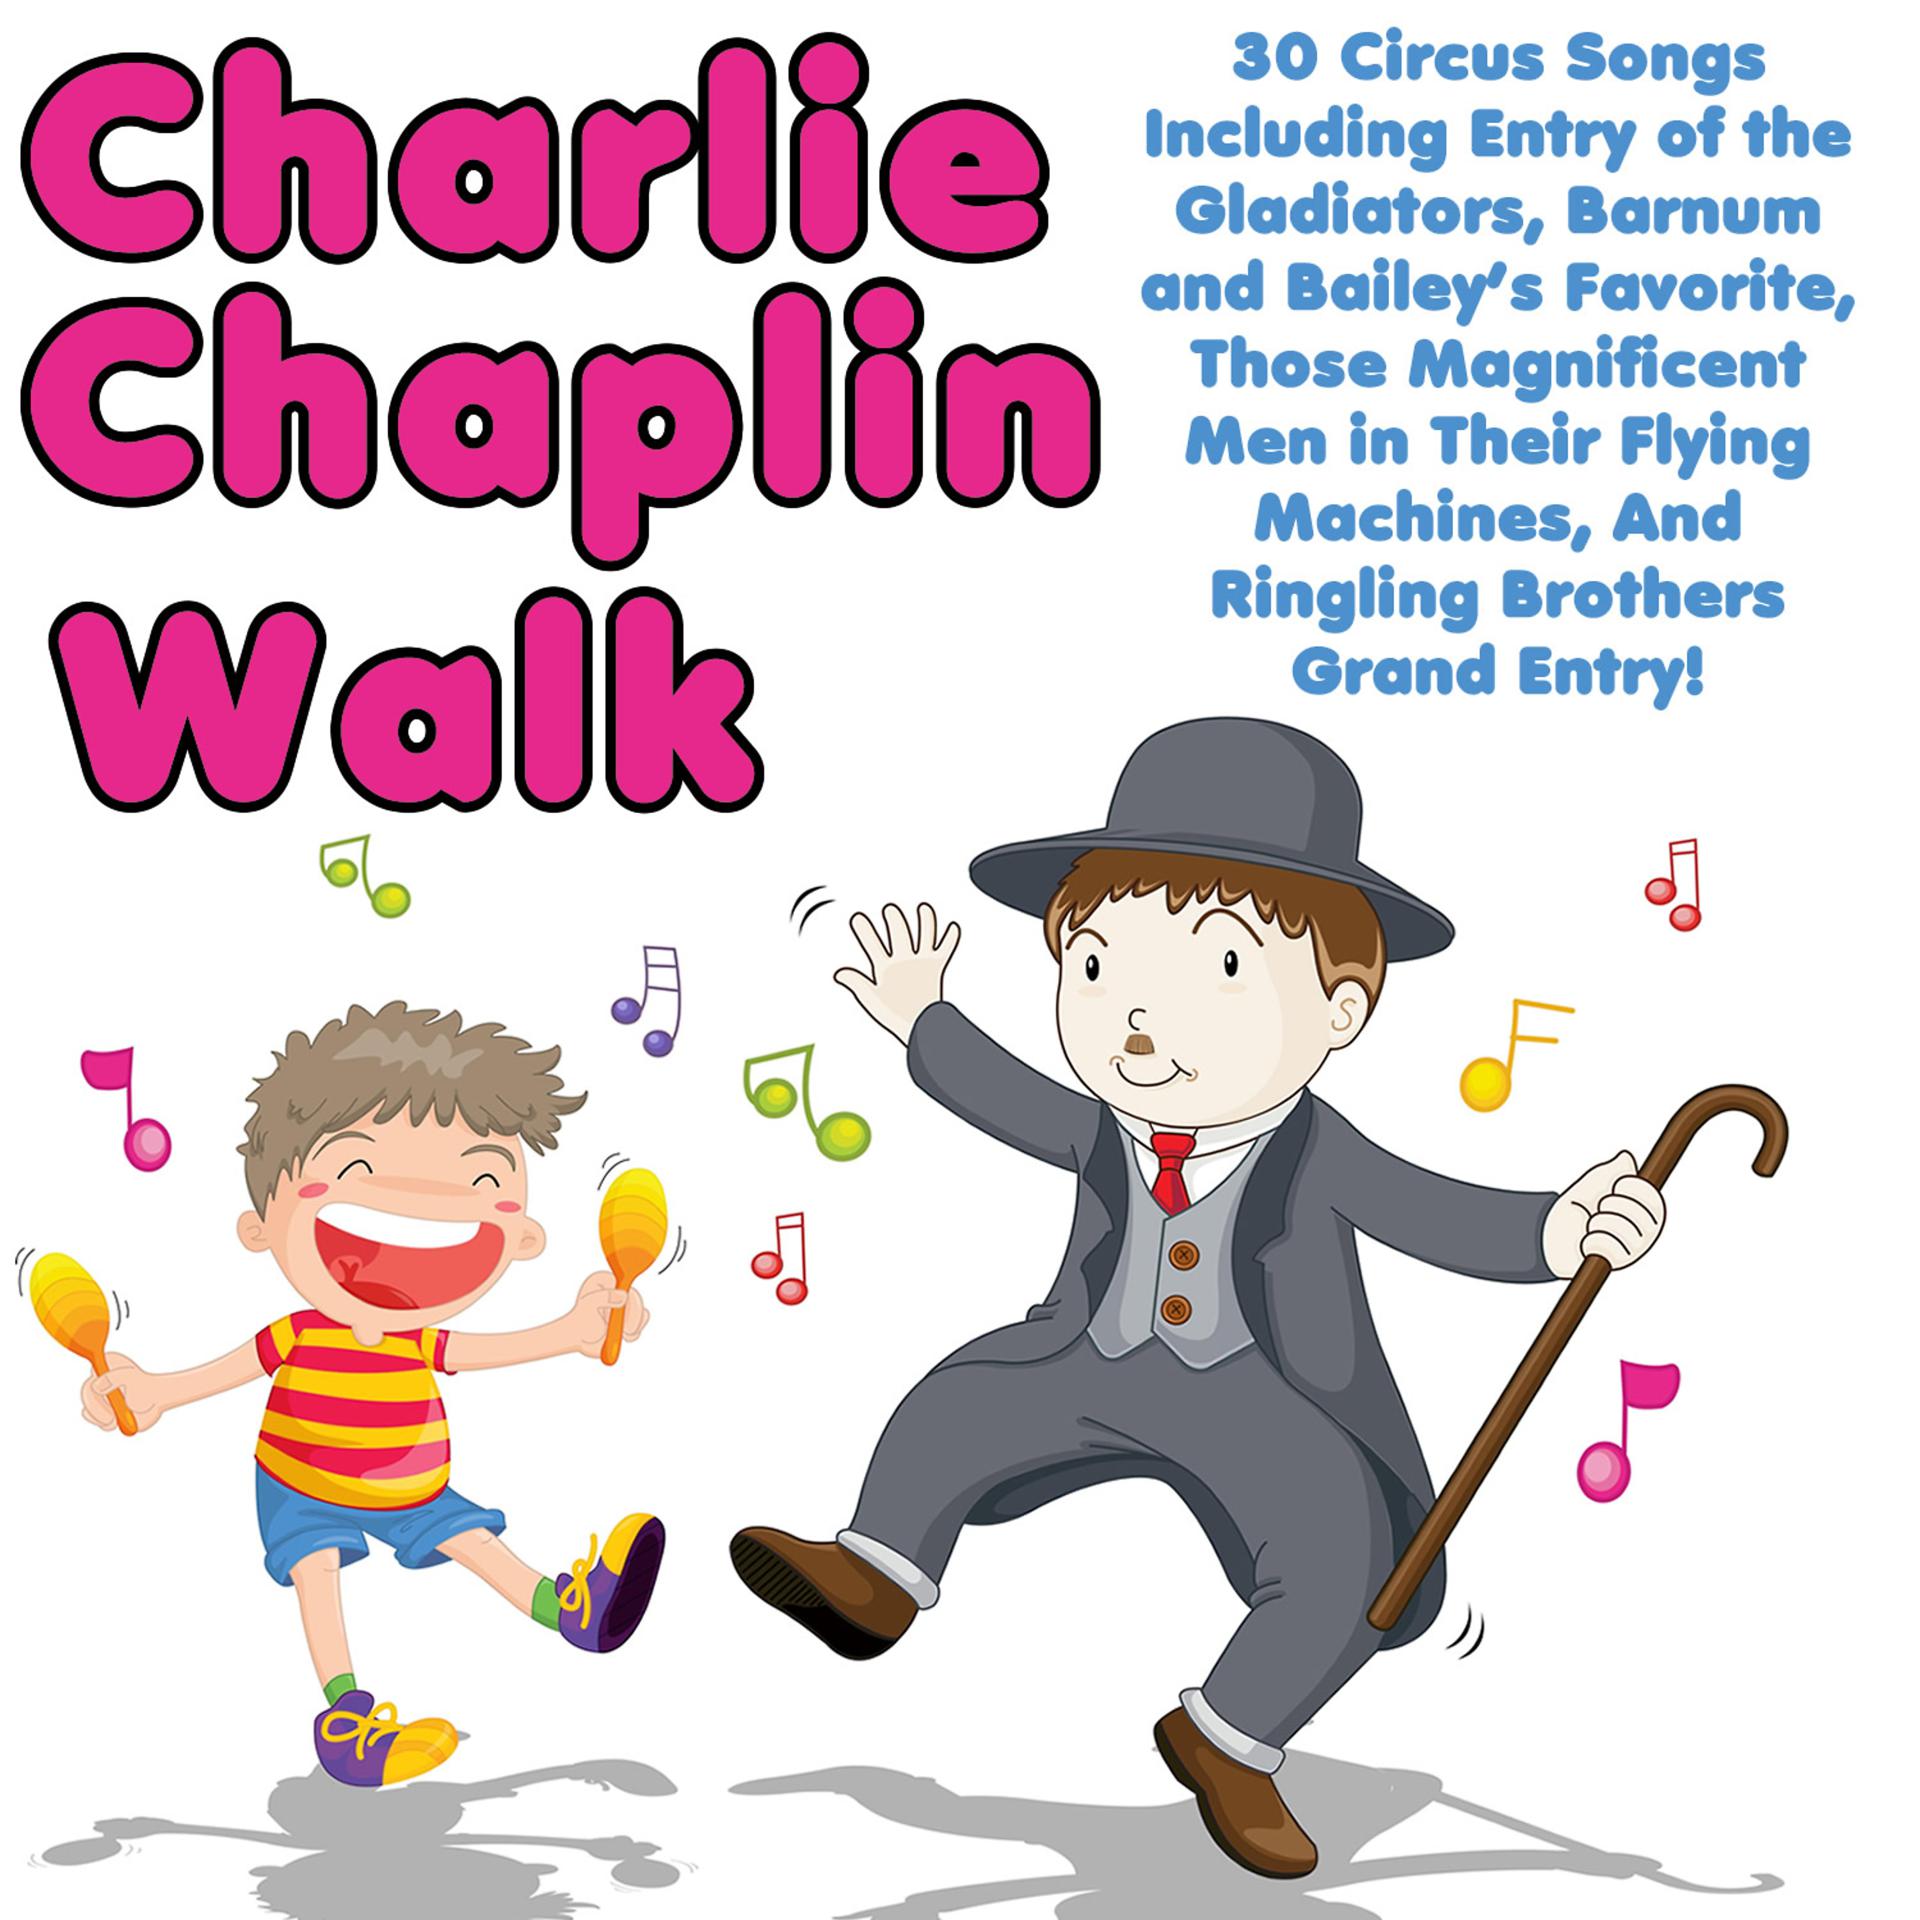 Постер альбома Charlie Chaplin Walk: 30 Circus Songs Including Entry of the Gladiators, Barnum and Bailey's Favorite, Those Magnificent Men in Their Flying Machines, And Ringling Brothers Grand Entry!